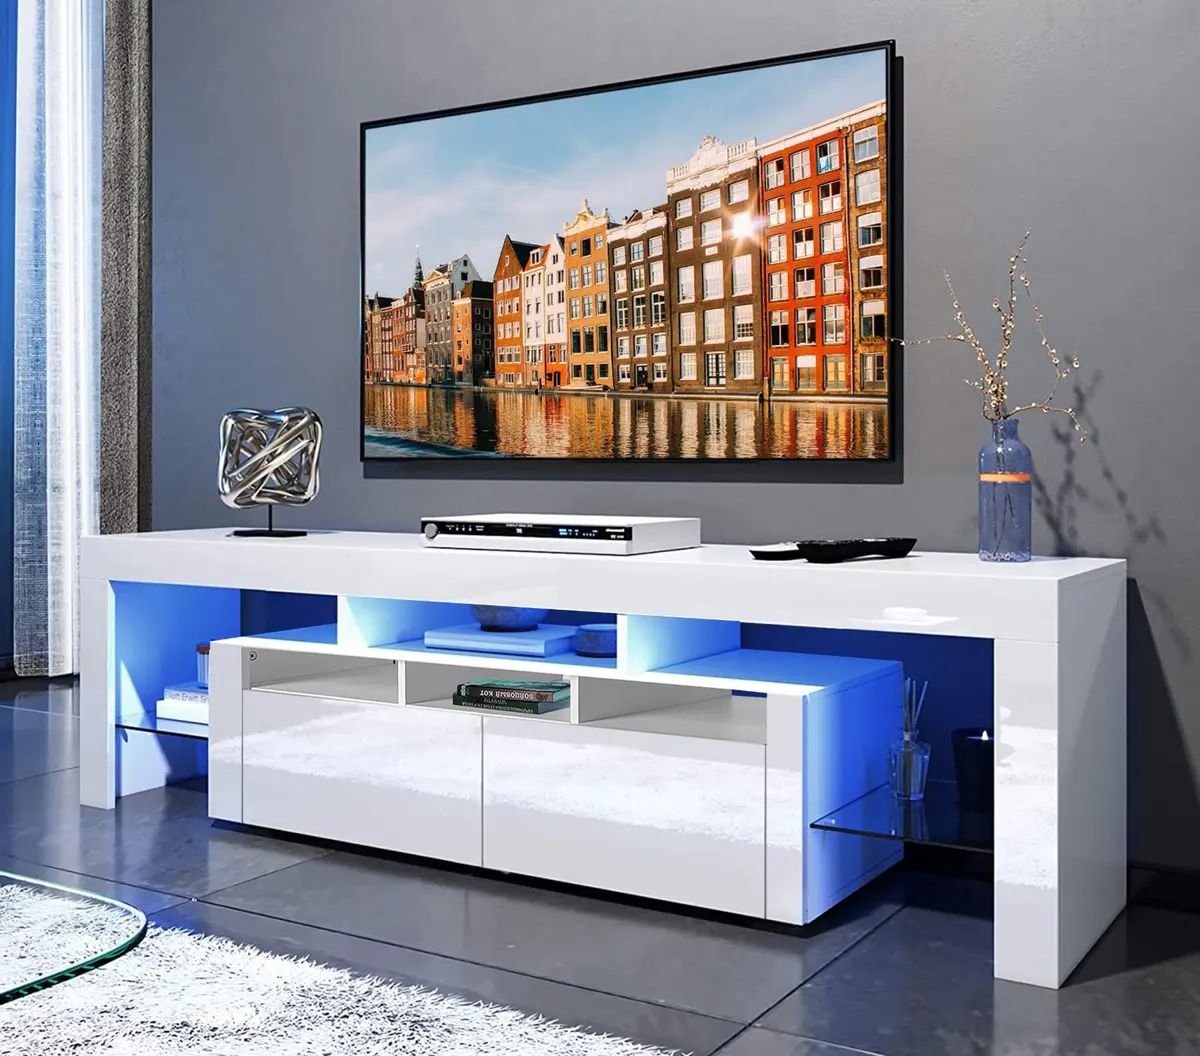 Modern Tv Unit Cabinet White Led Tv Stand High Gloss Doors Living Room Rgb  Light | Ebay Intended For Rgb Tv Entertainment Centers (View 4 of 20)